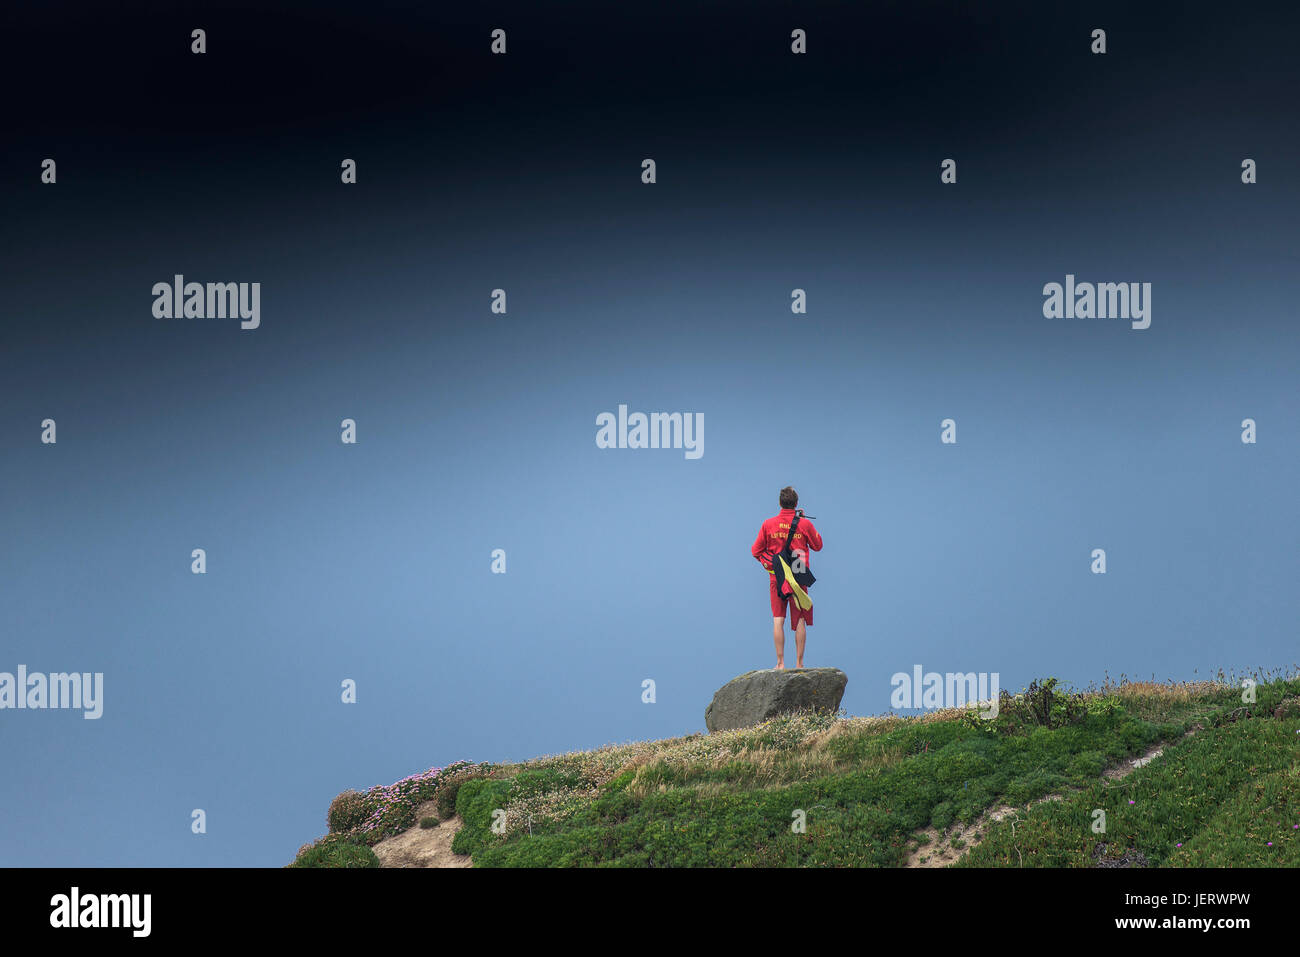 A RNLI Lifeguard standing on a rock using a personal radio as storm clouds gather. Stock Photo